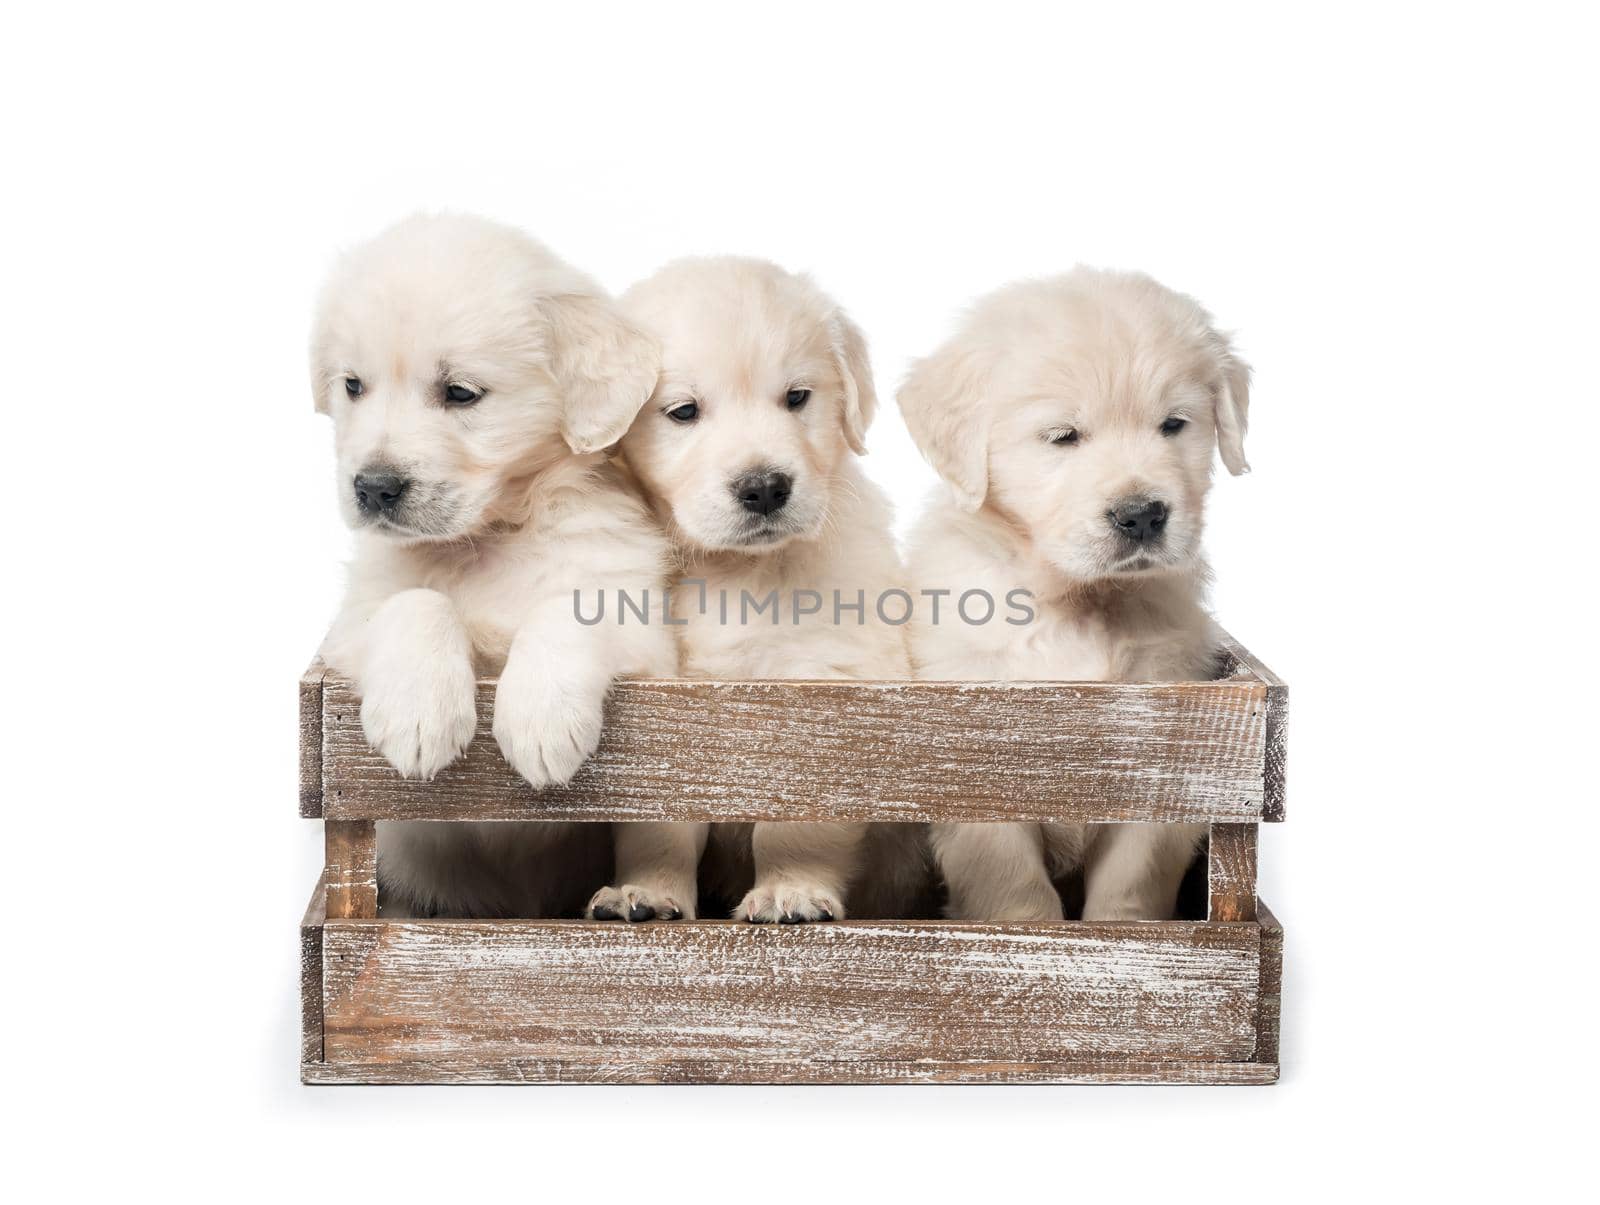 Cute three funny golden retriever puppies in basket isolated on white background